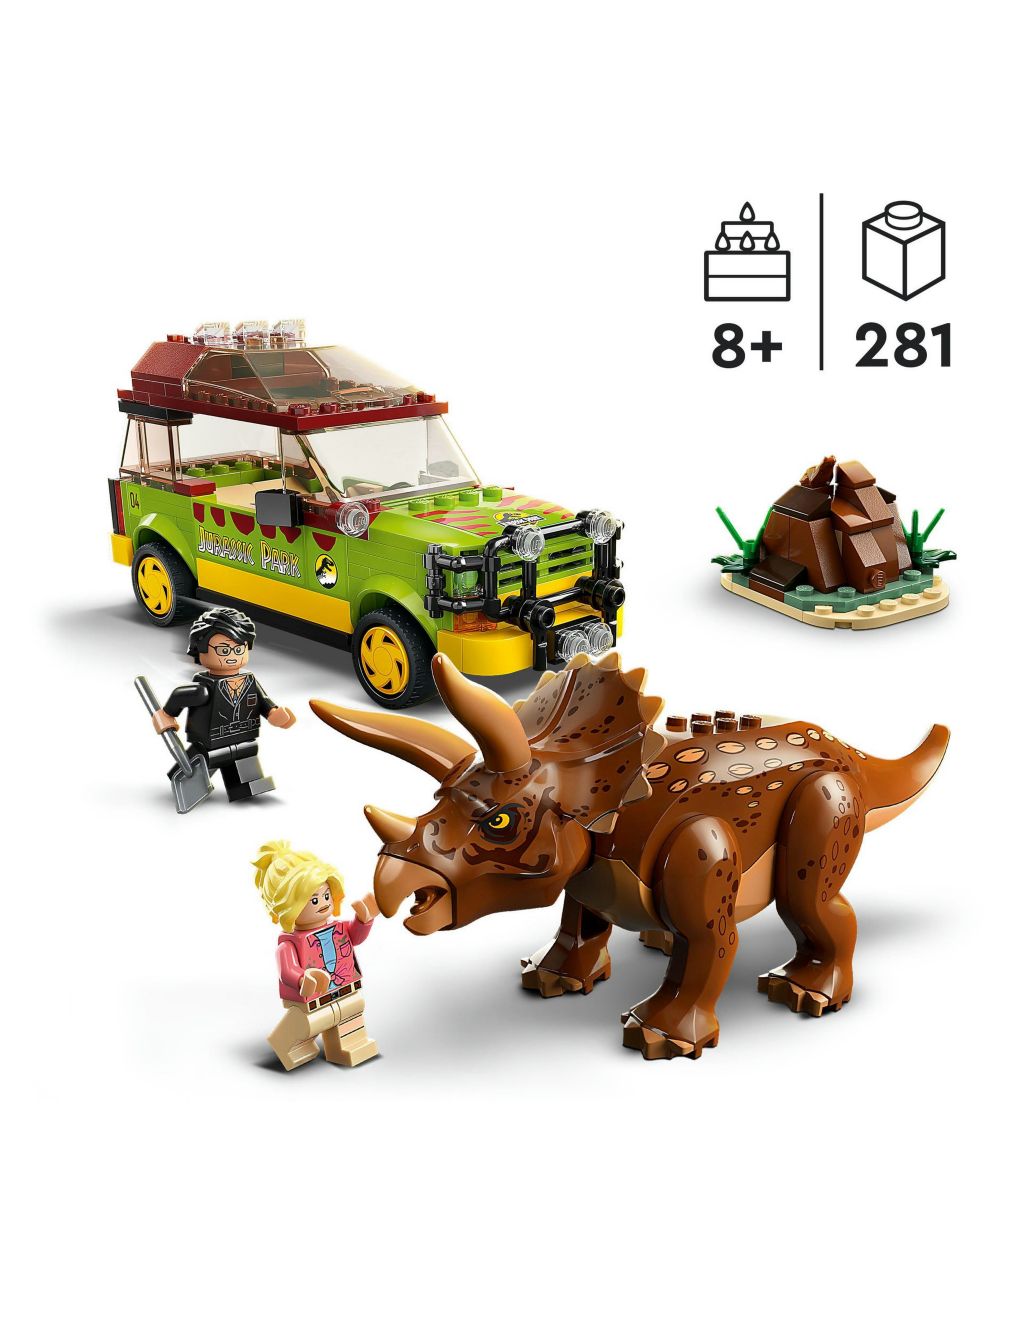 LEGO Jurassic Park Triceratops Research Set 76959 (8+ Yrs) 1 of 6